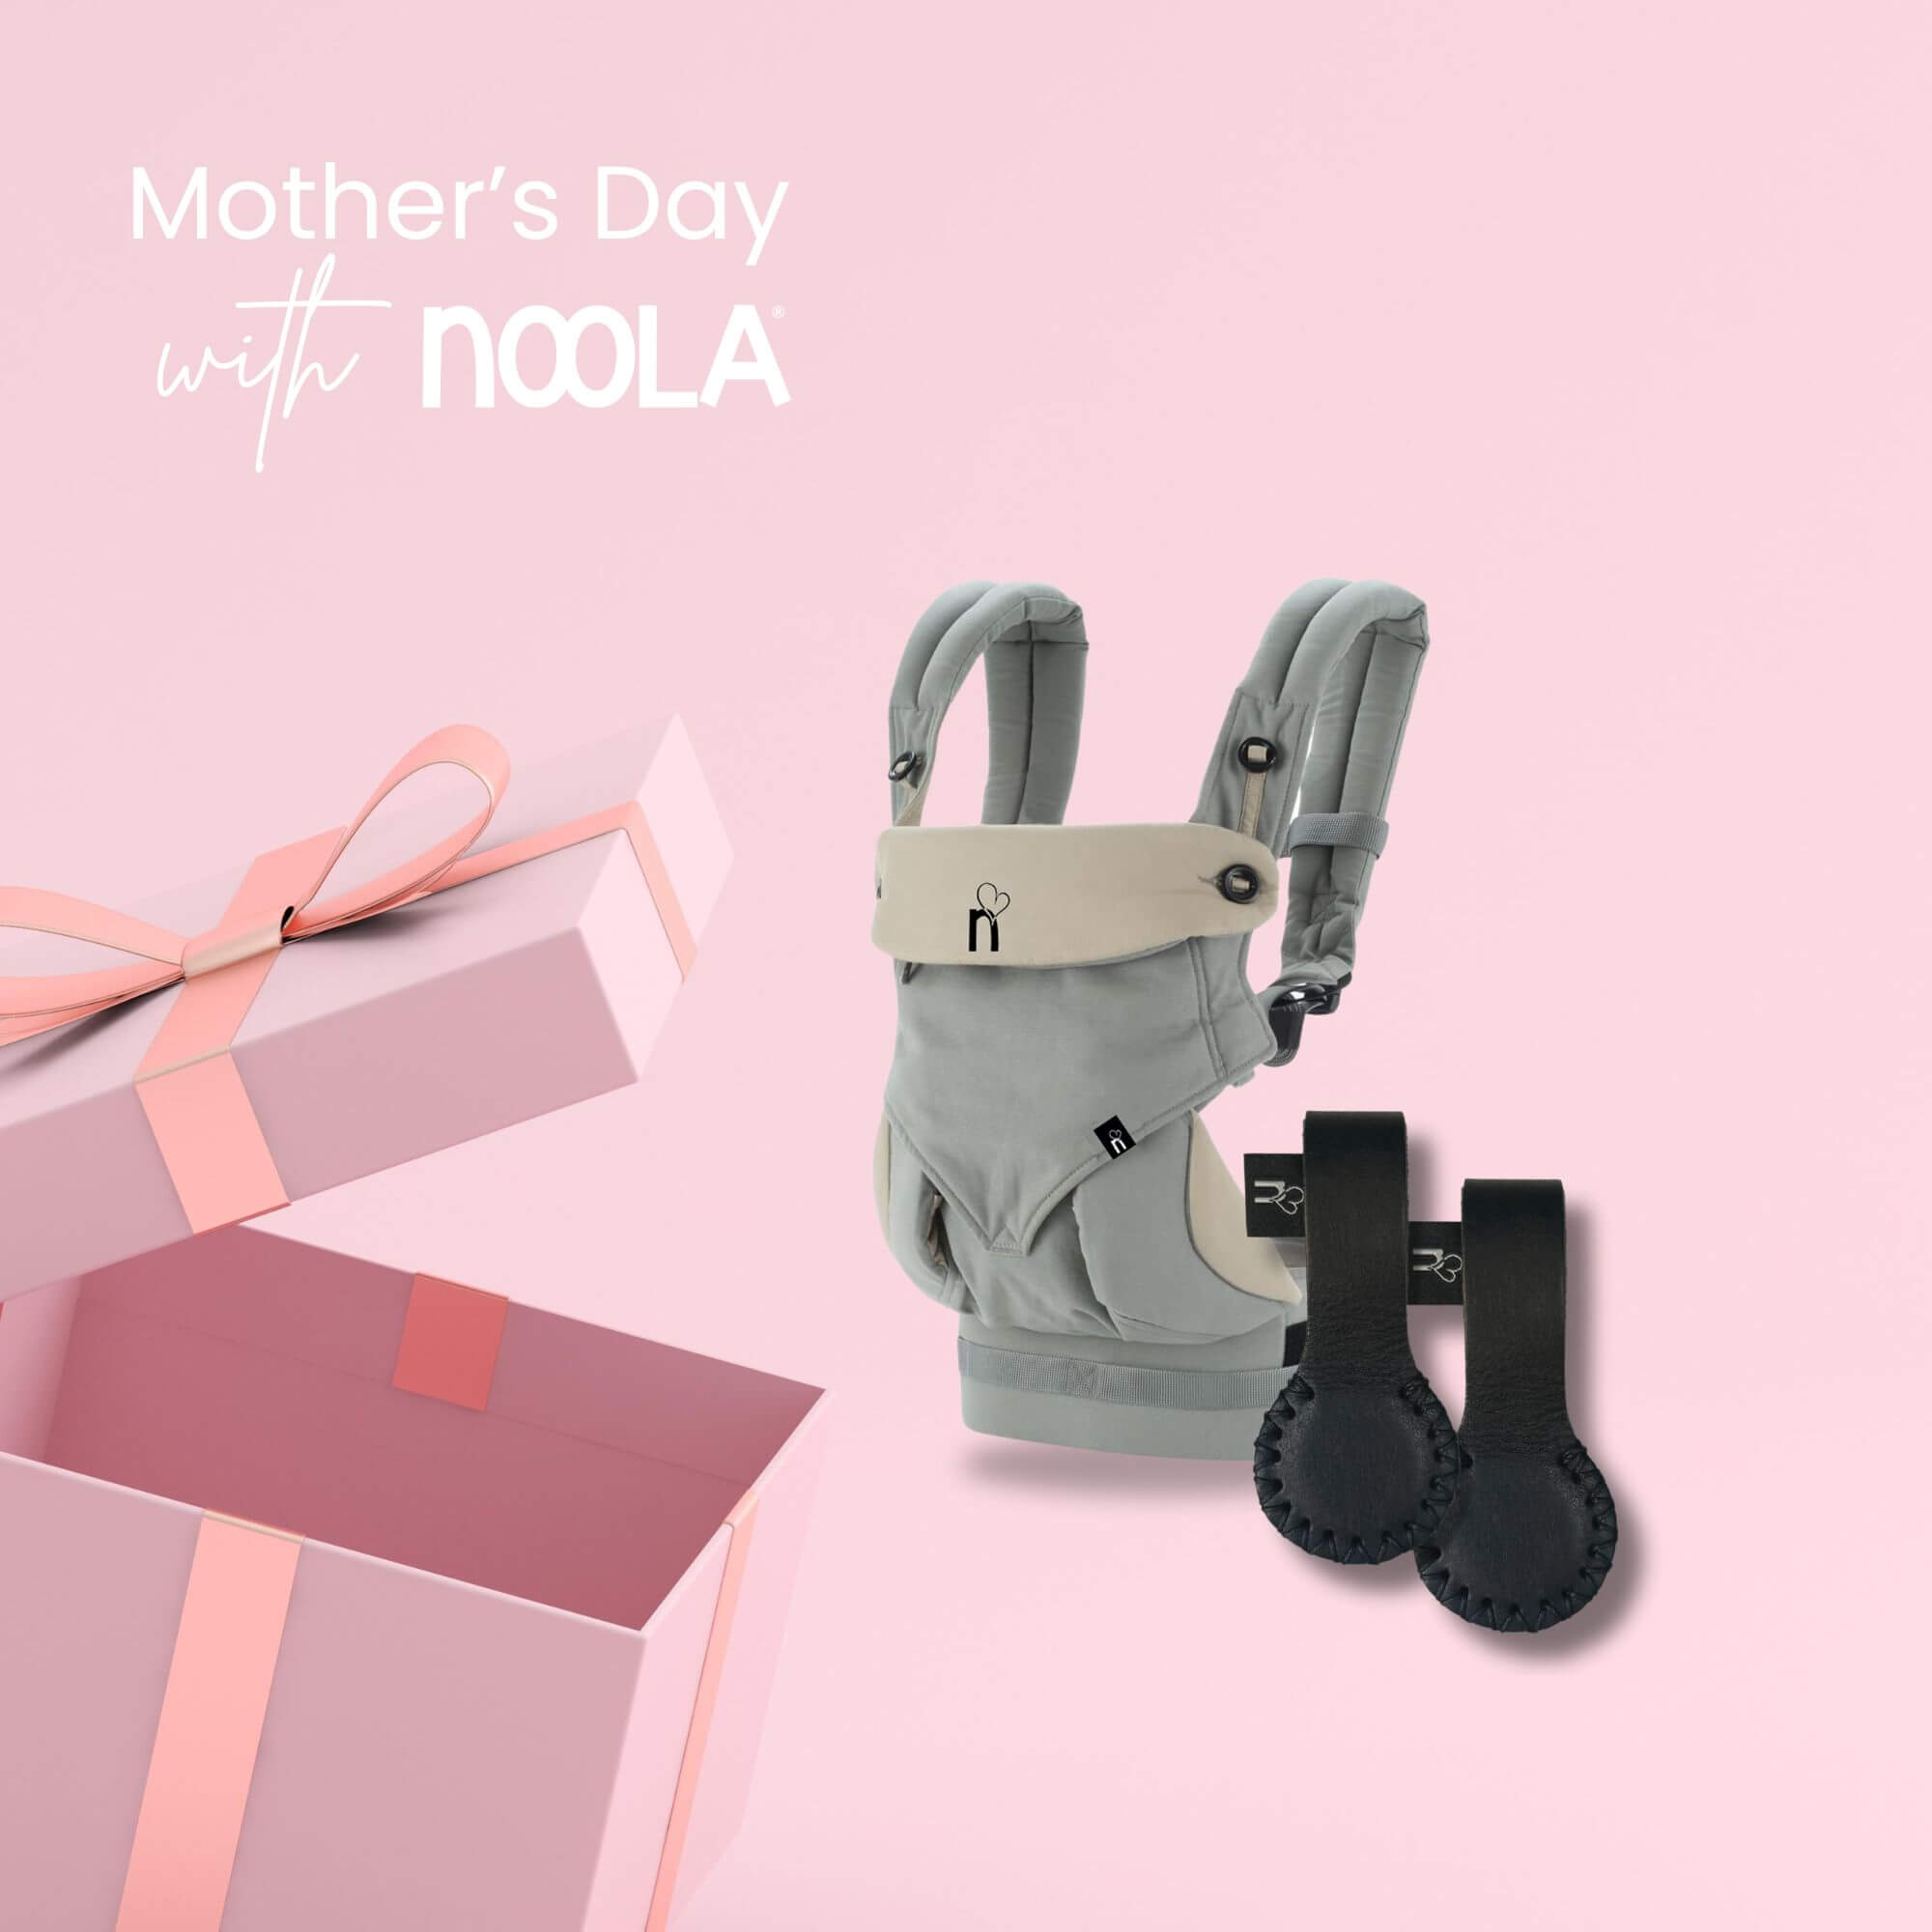 noola mothersday gift box bundle closer2you baby carrier grey with stella clips black